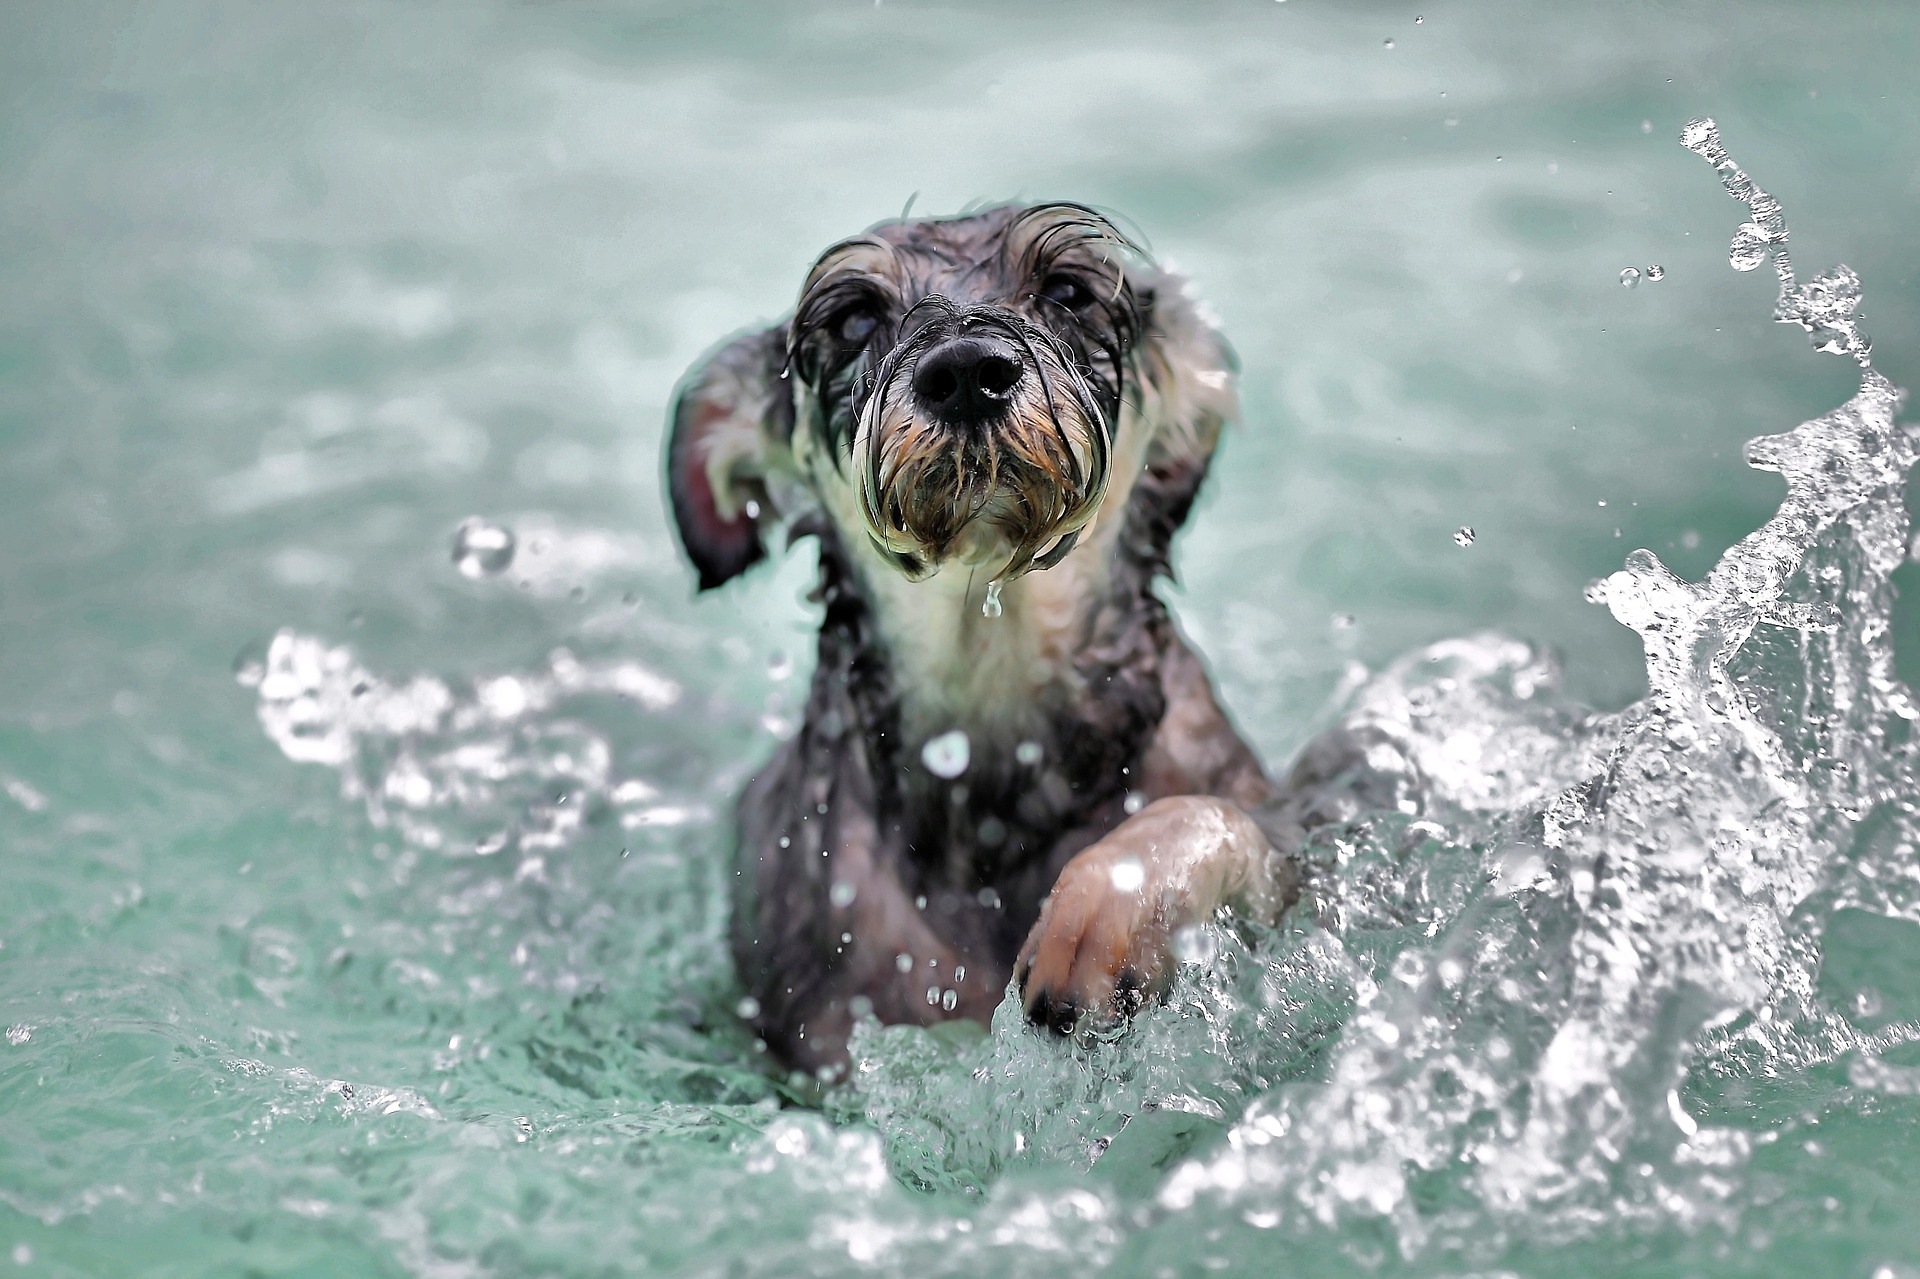 Swimming is a great way to keep a dog cool in the summer